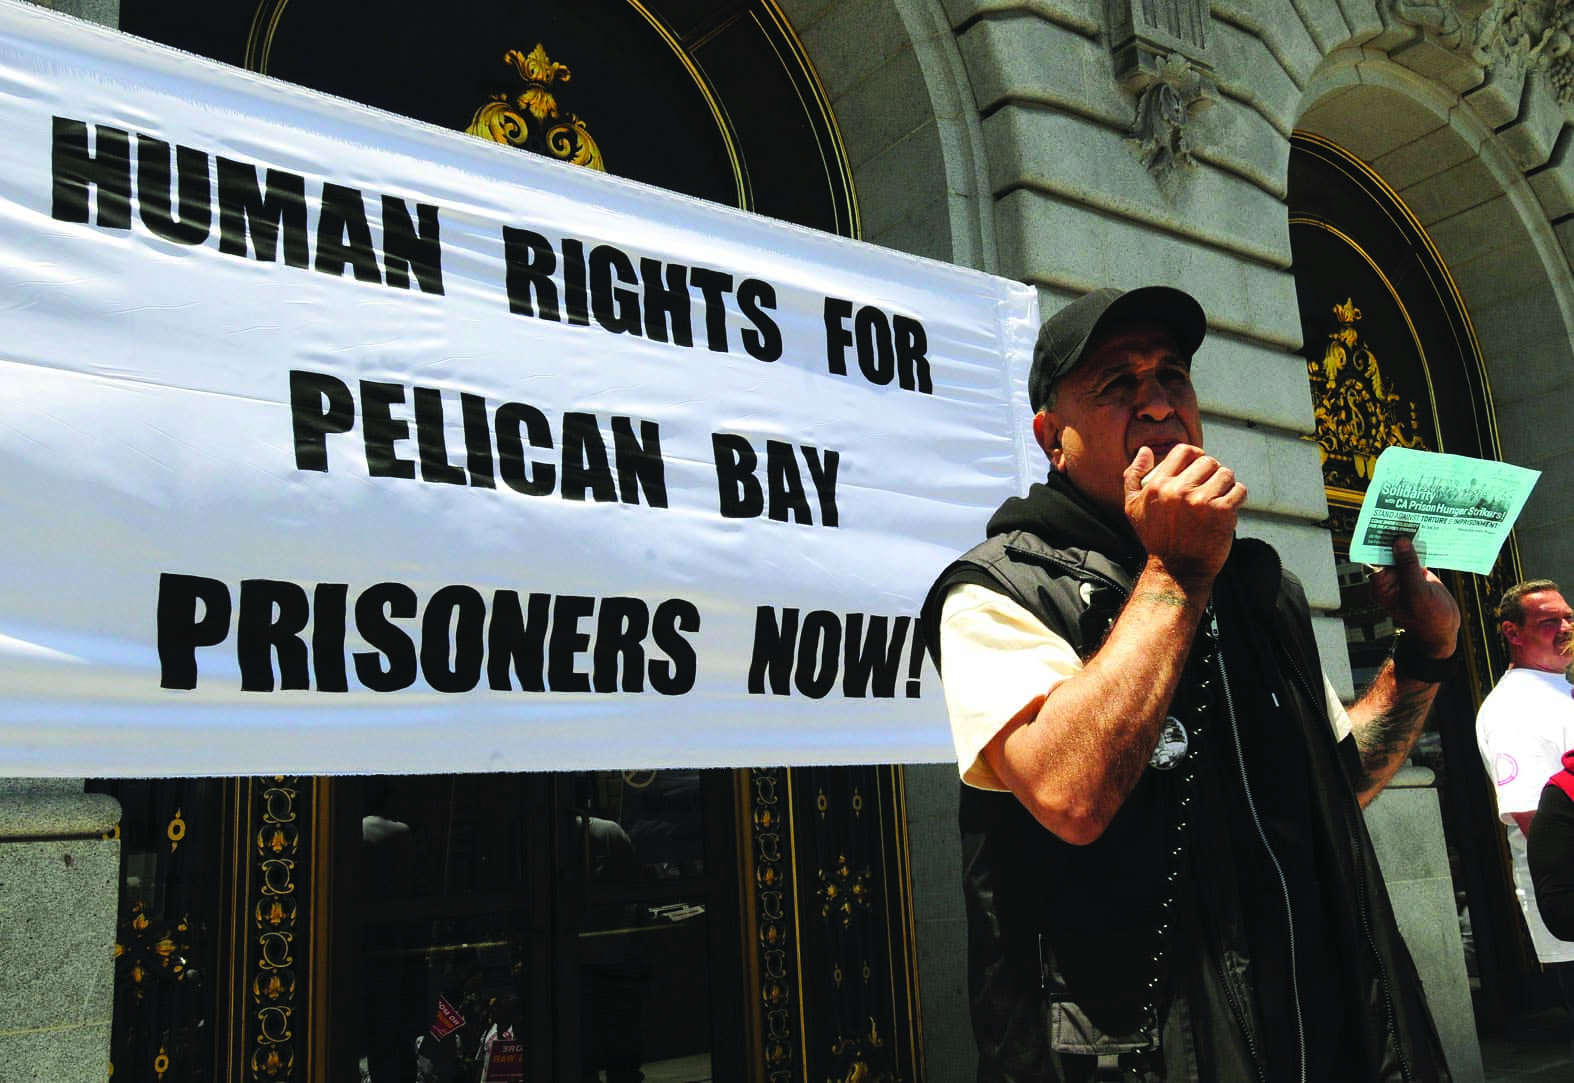 Bato-Talamantez-urges-support-for-SHU-hunger-strike-at-anti-war-on-drugs-rally-061711-by-United-for-Drug-Policy-Reform, California SHU prisoners begin hunger strike July 1, Behind Enemy Lines 